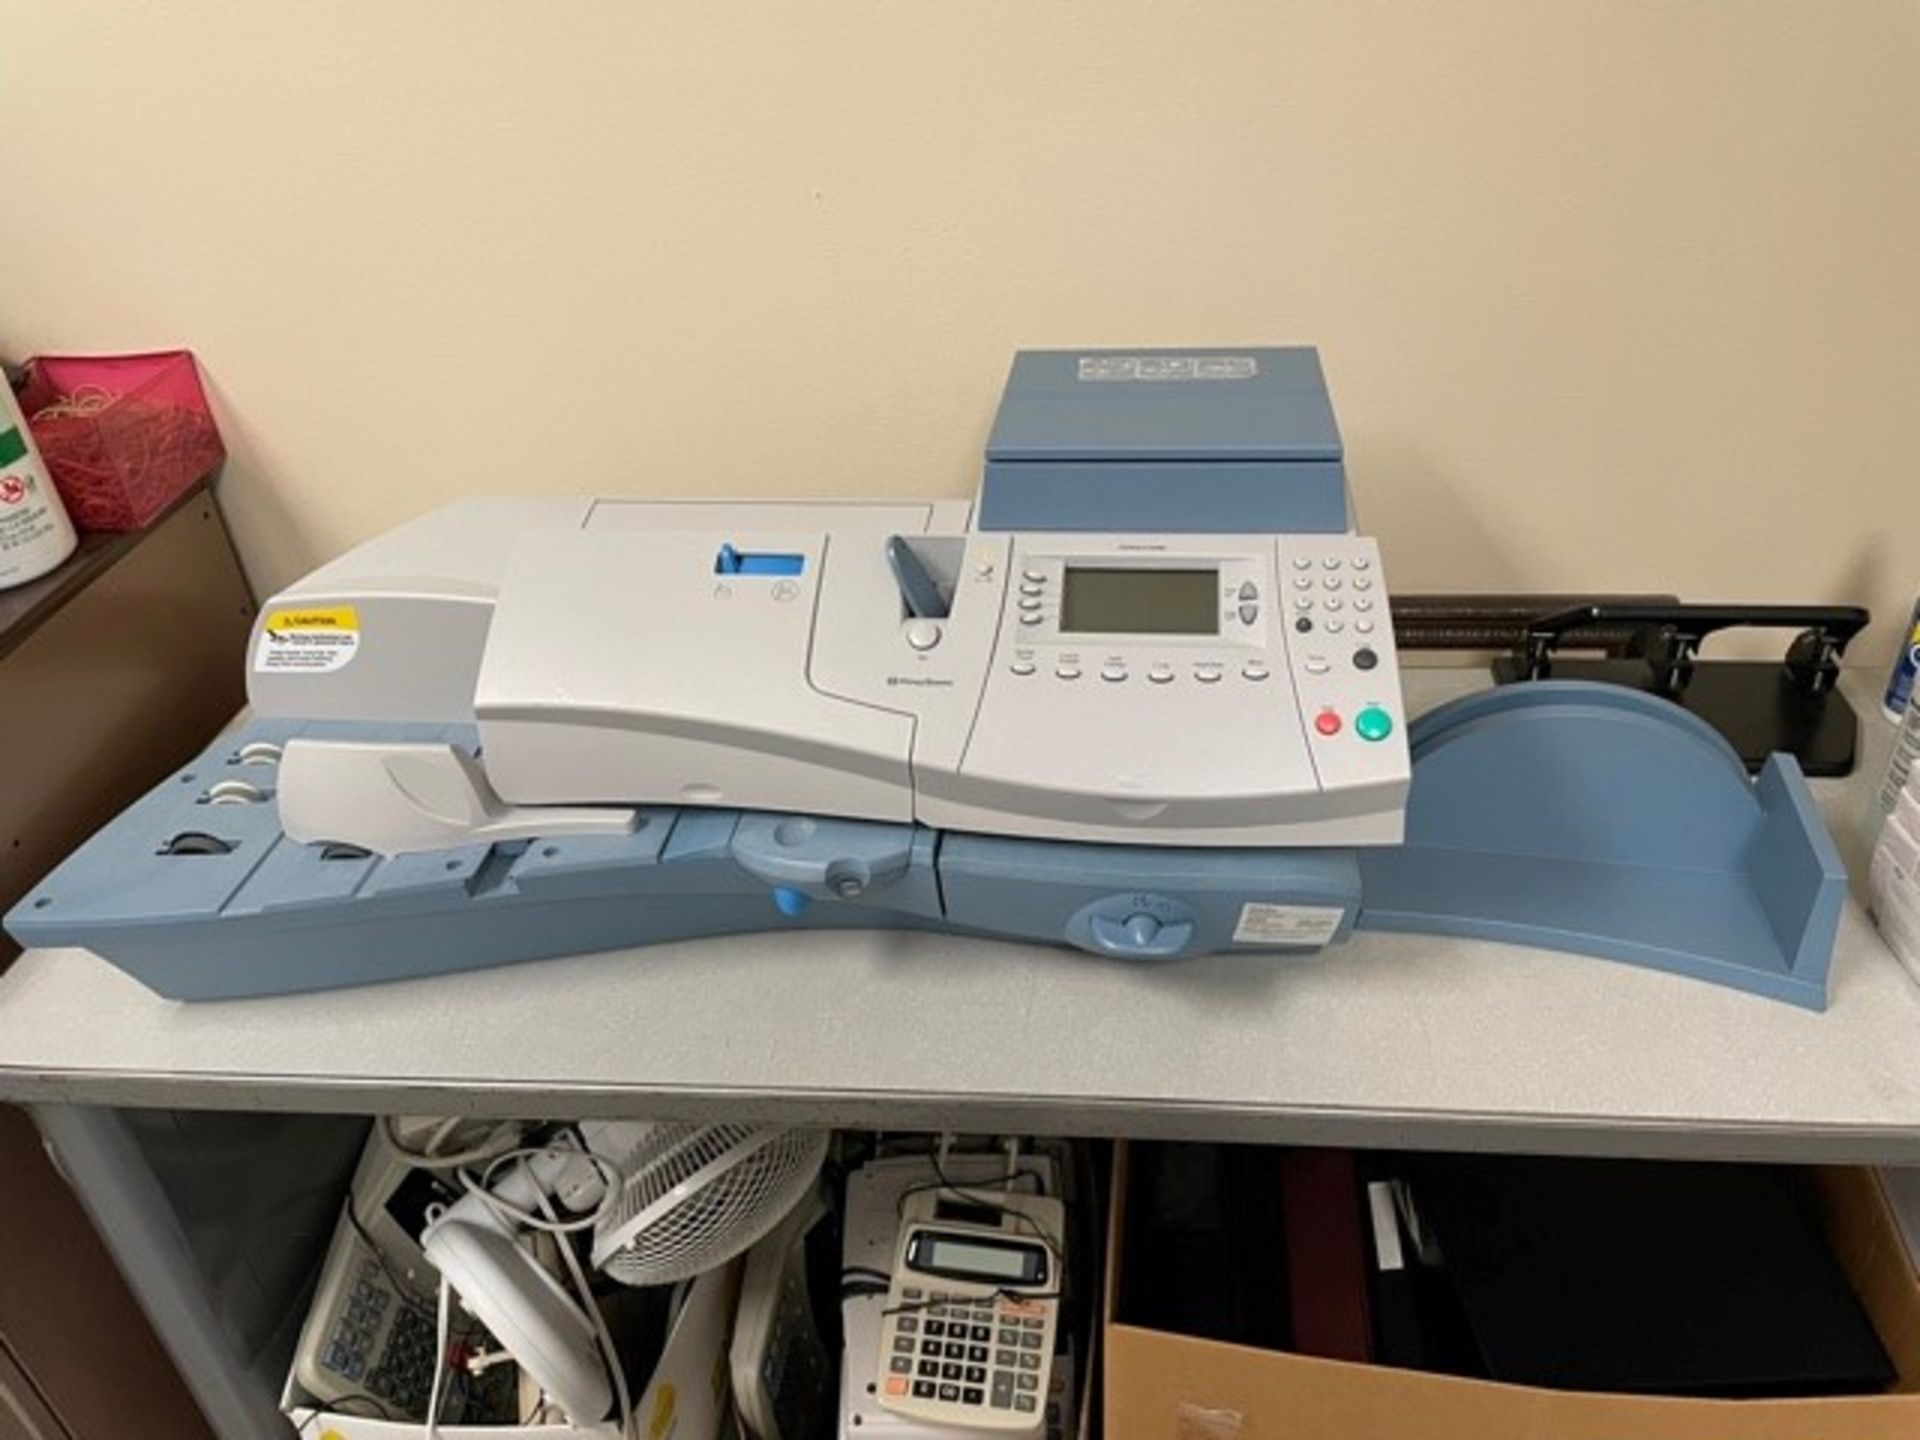 Pitney Bowes Postage Meter Model #: DM400C; Serial#: 0881623 (Does not Include Meter) - (Located In: